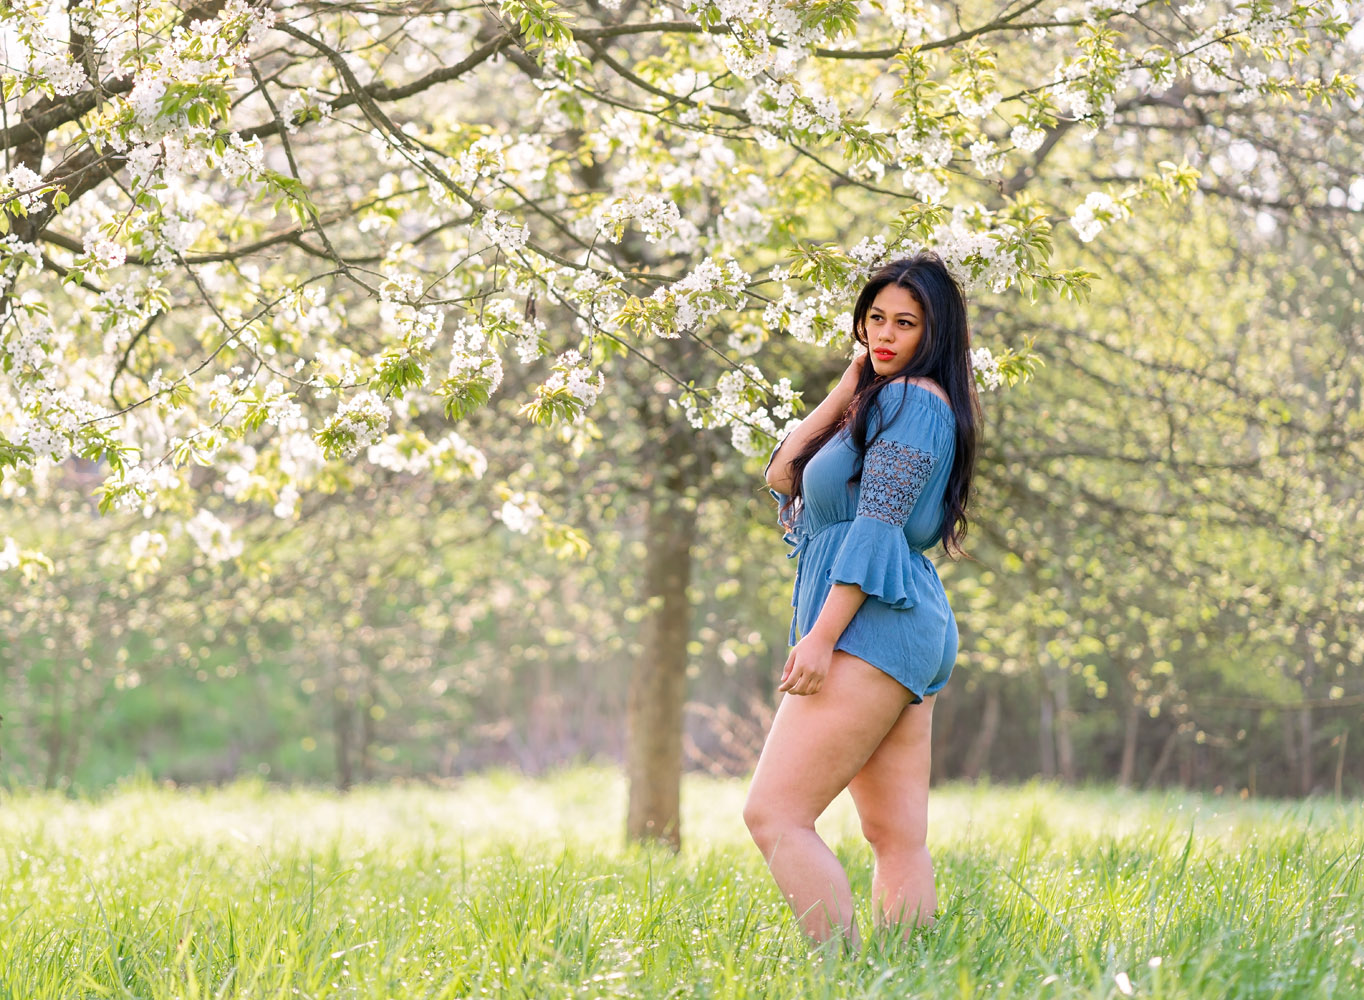  kaiserslautern Ramstein KMC Photographer beauty and portrait photography in Reichenbach-Steegen, Rheinland-Pfaly Germany. Beauty Portrait in Spring with beautiful dark hair girl in blue romper and white Cherry blossoms by Sarah Havens 